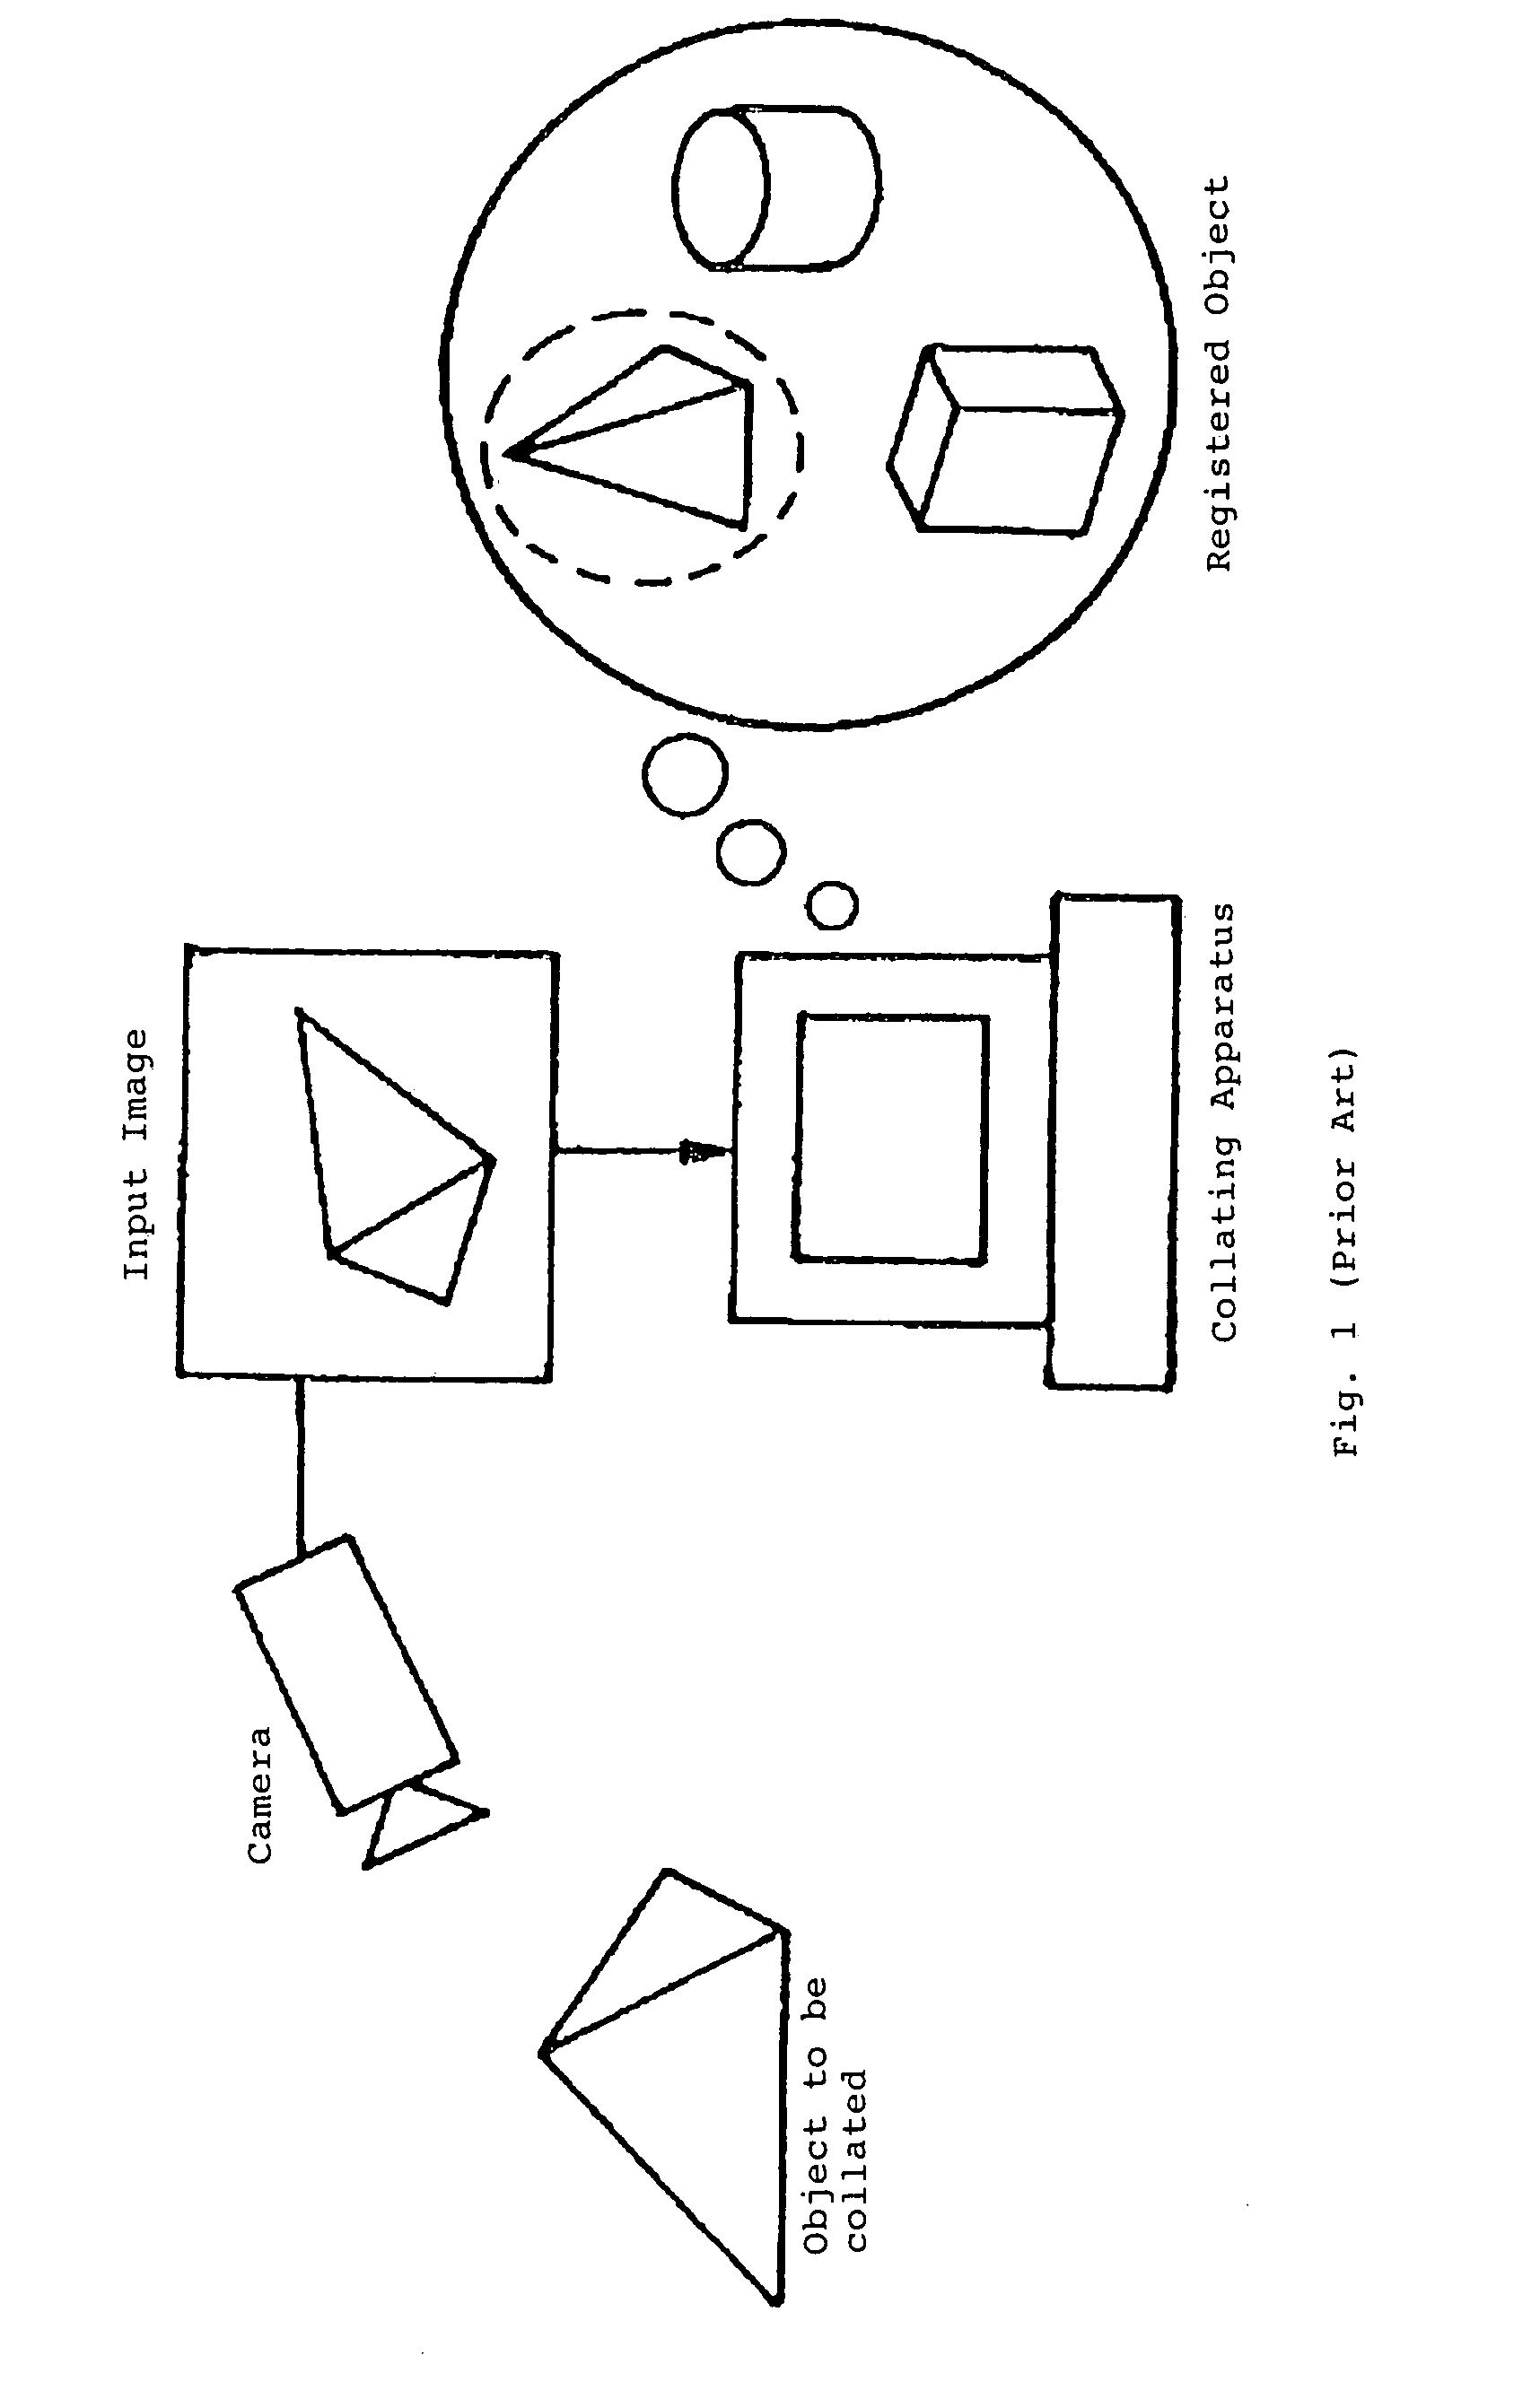 Method and apparatus for collating object